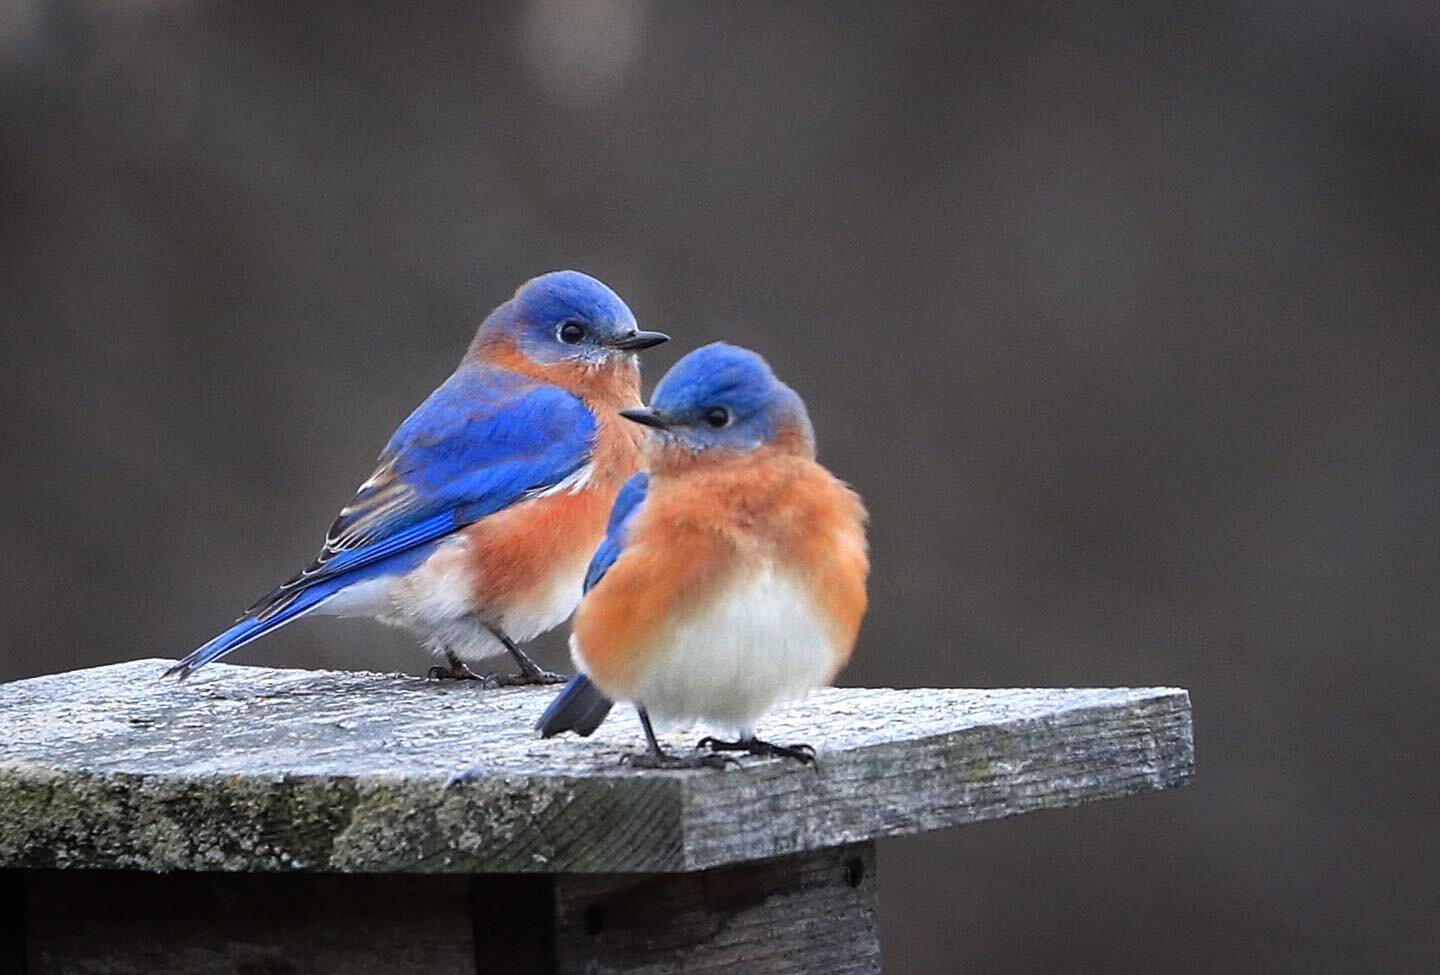 These two little bluebirds lit up my day while they were just minding their own. I watched them preen, play and fly around me while I snapped and laughed. Just two little bluebirds teaching me to Be.
-
Does anyone have little pockets of awesome they&